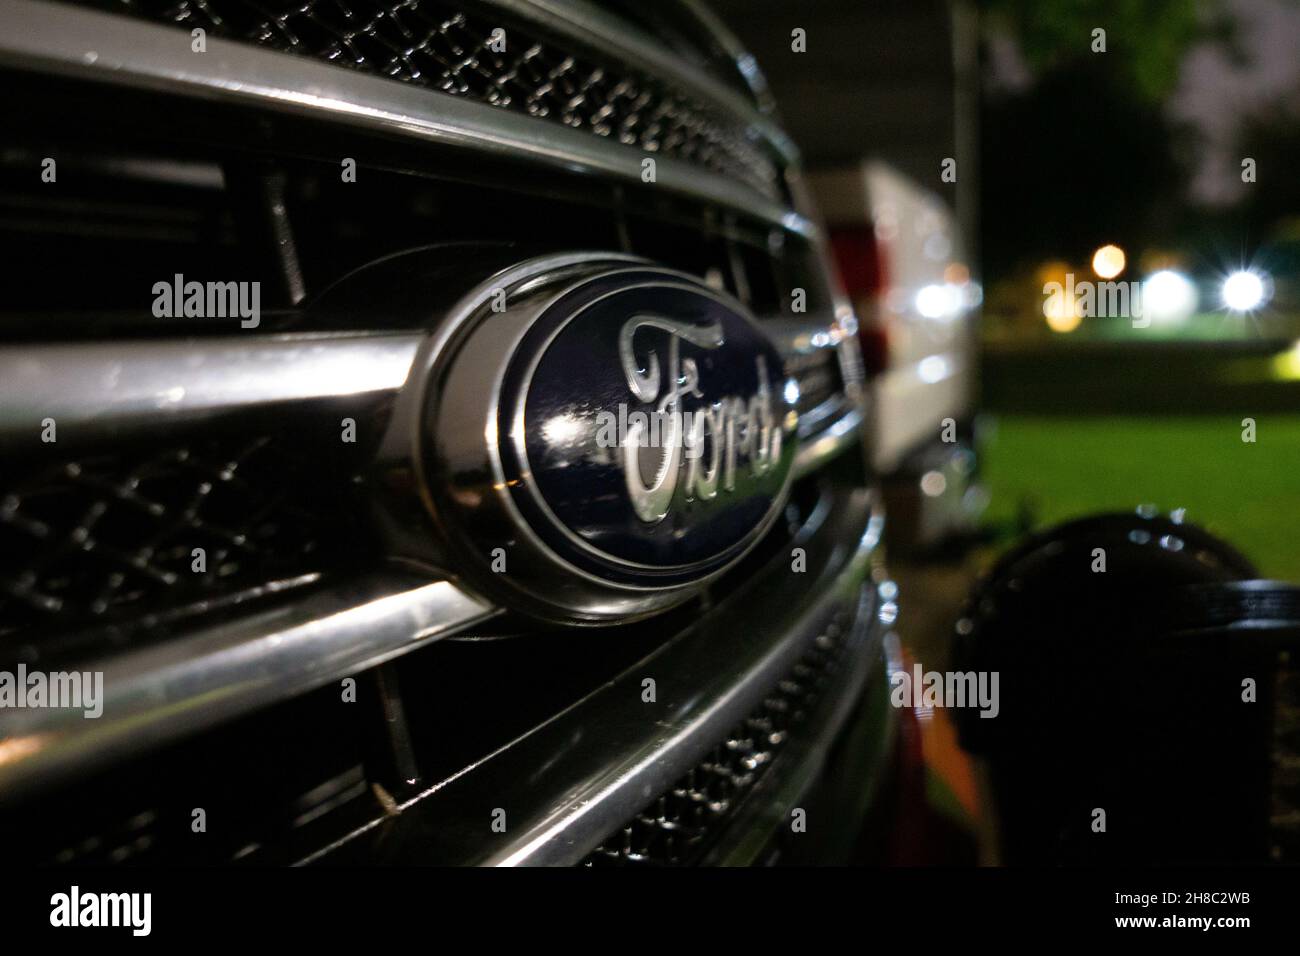 WESLACO, UNITED STATES - May 02, 2021: A selective focus shot of a Ford truck grill logo Stock Photo